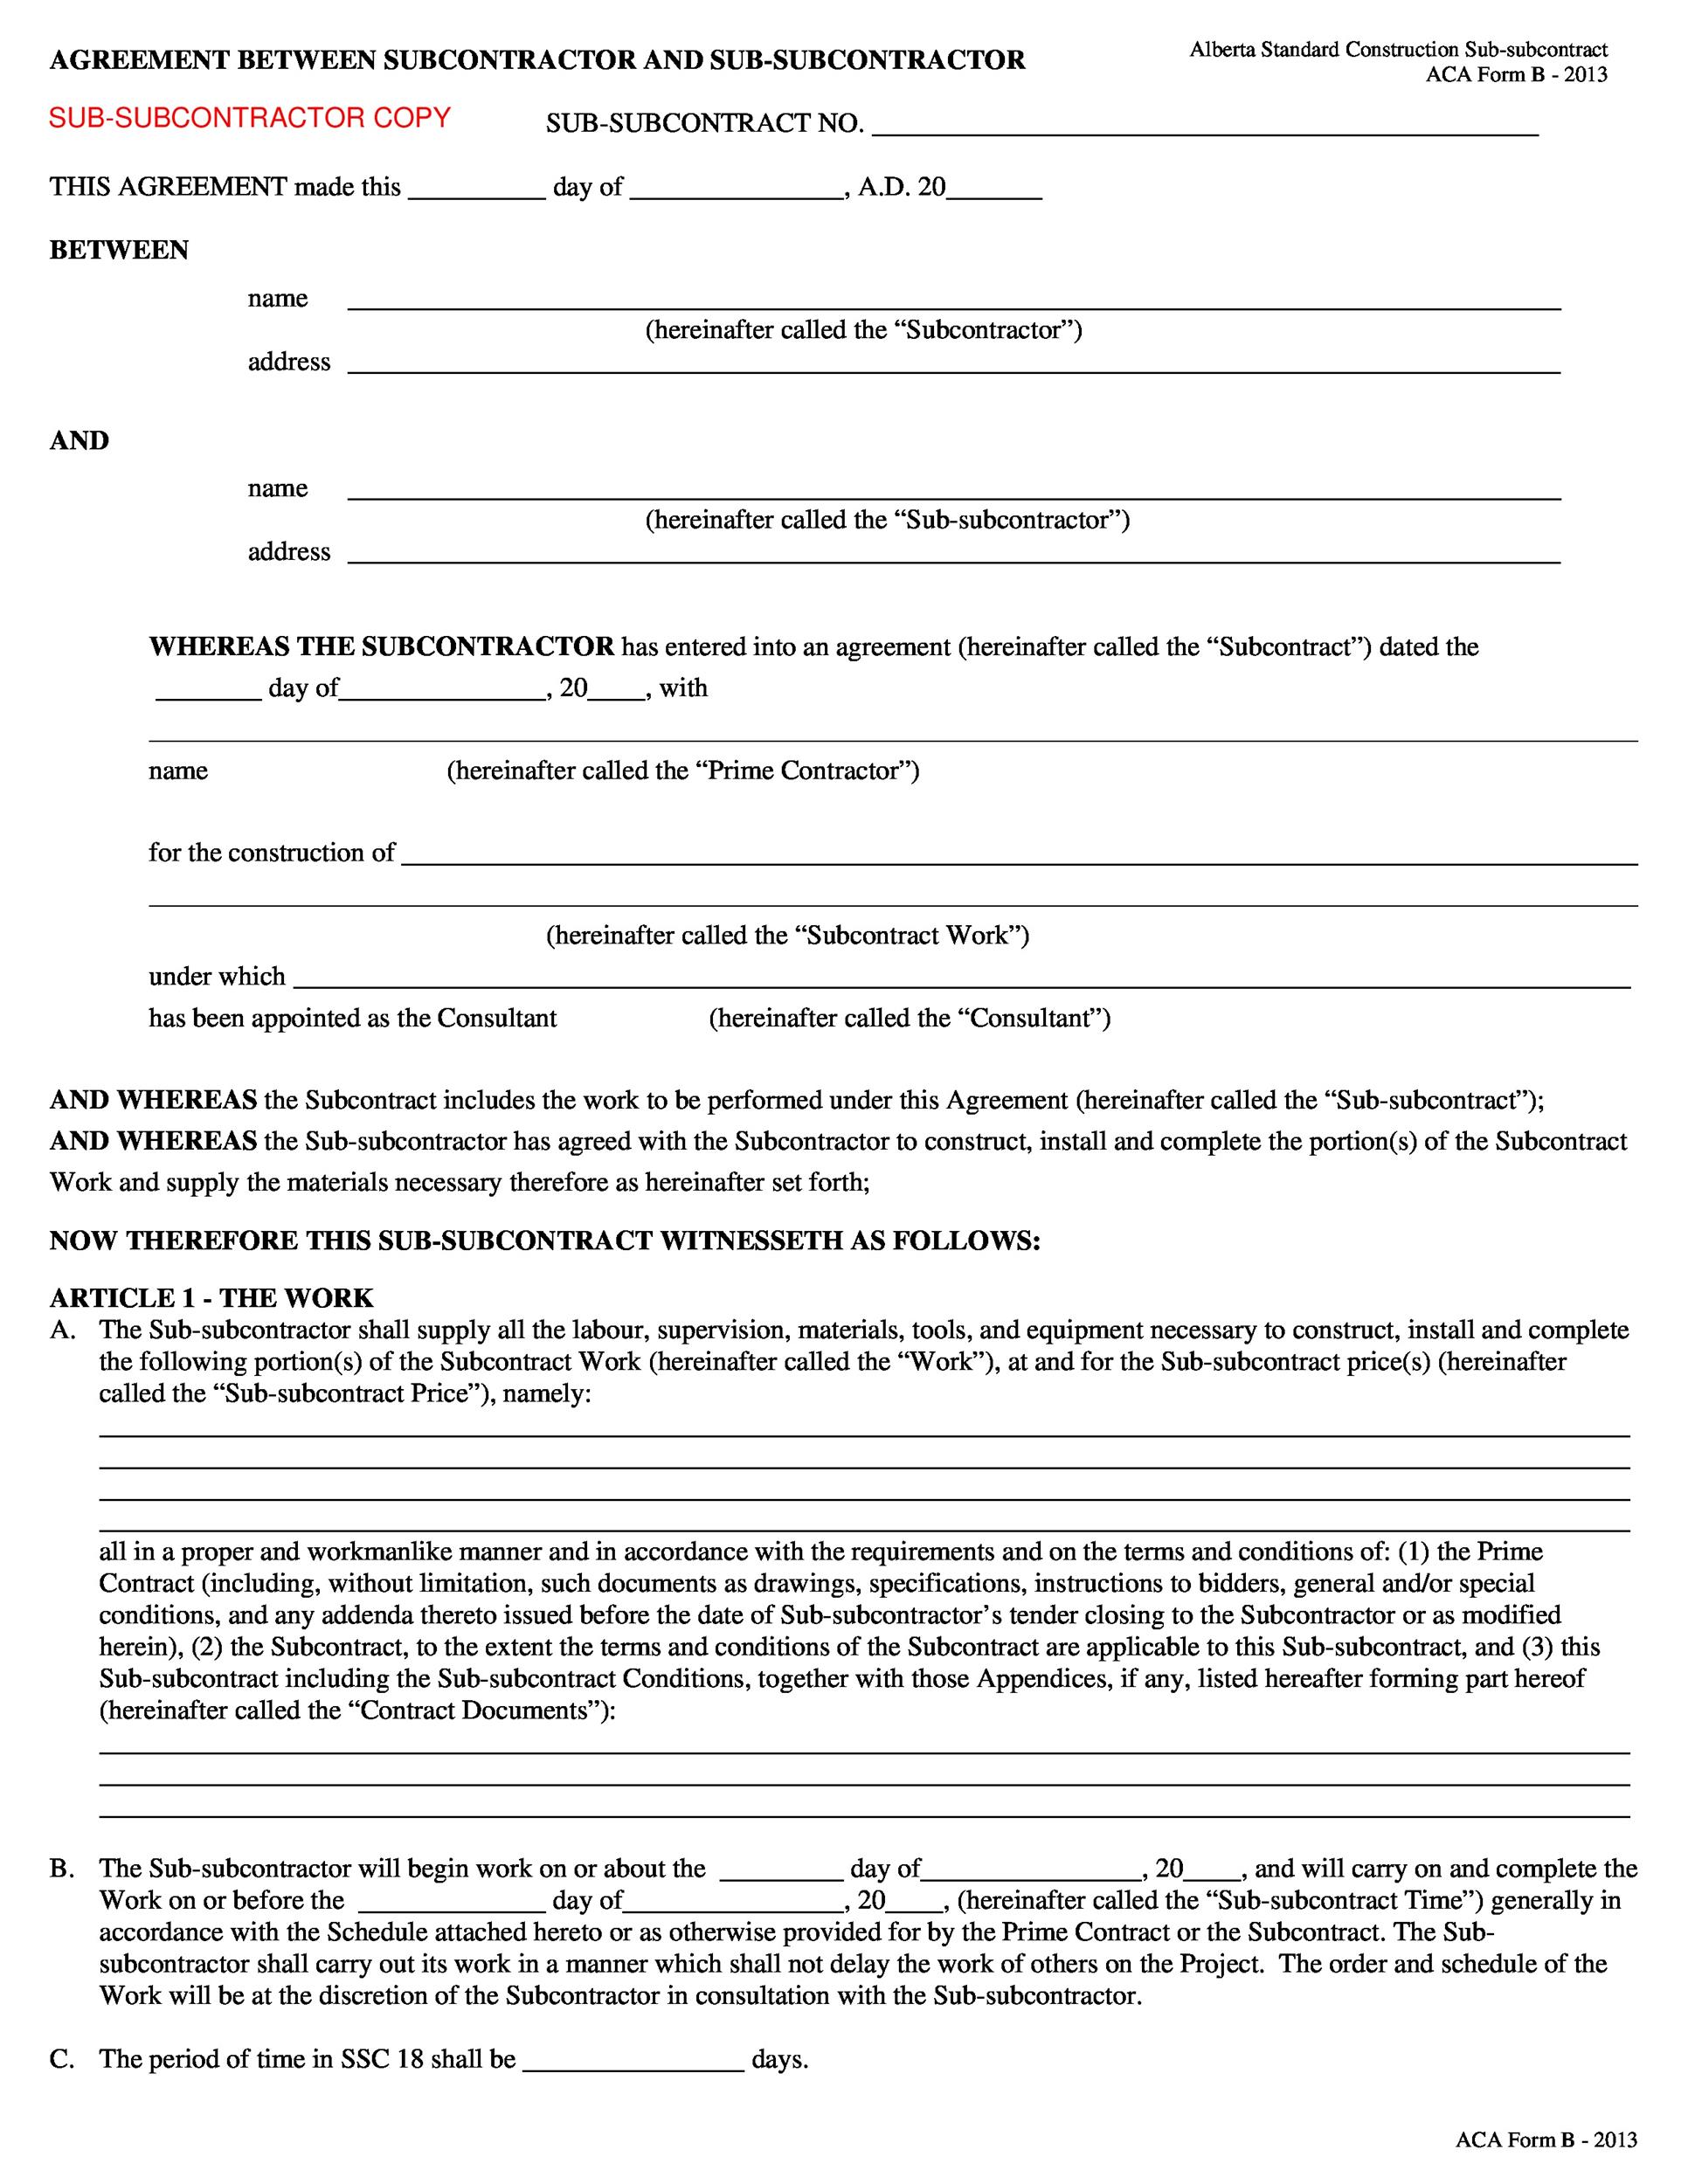 Free independent contractor agreement 51